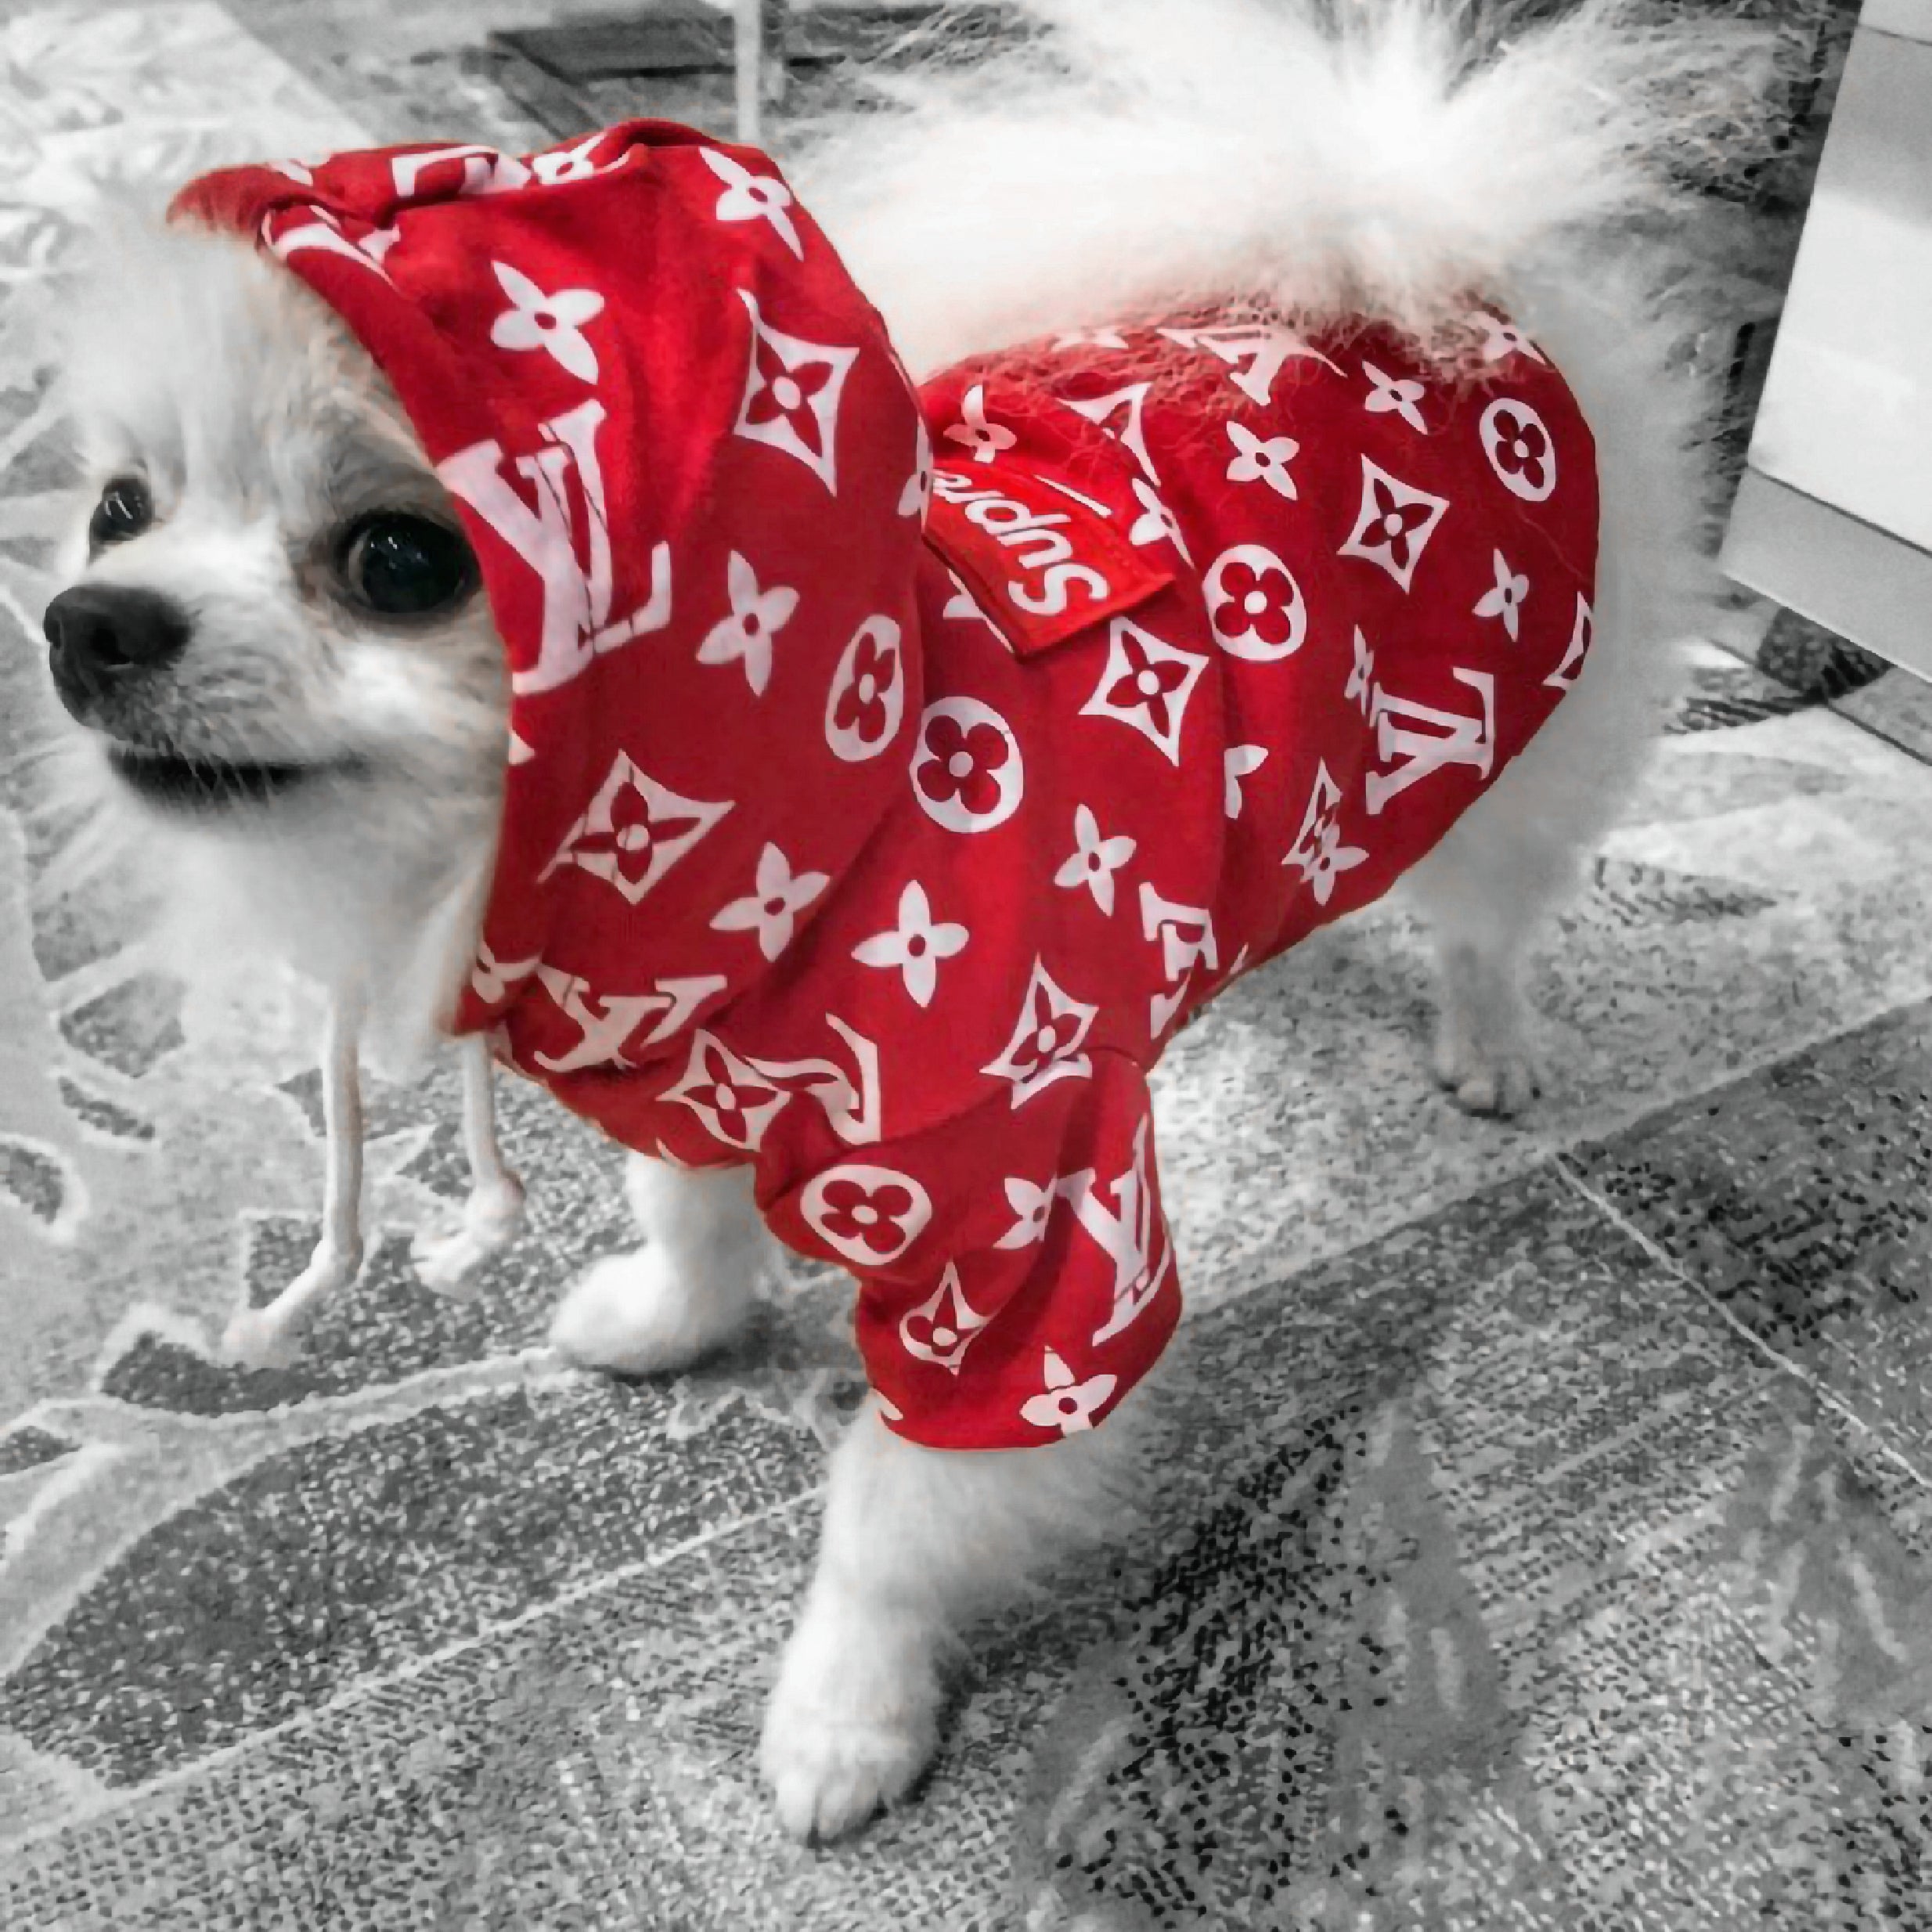 Dog wearing red and white Louis Vuitton x Supreme hoodie photo – Free  Apparel Image on Unsplash